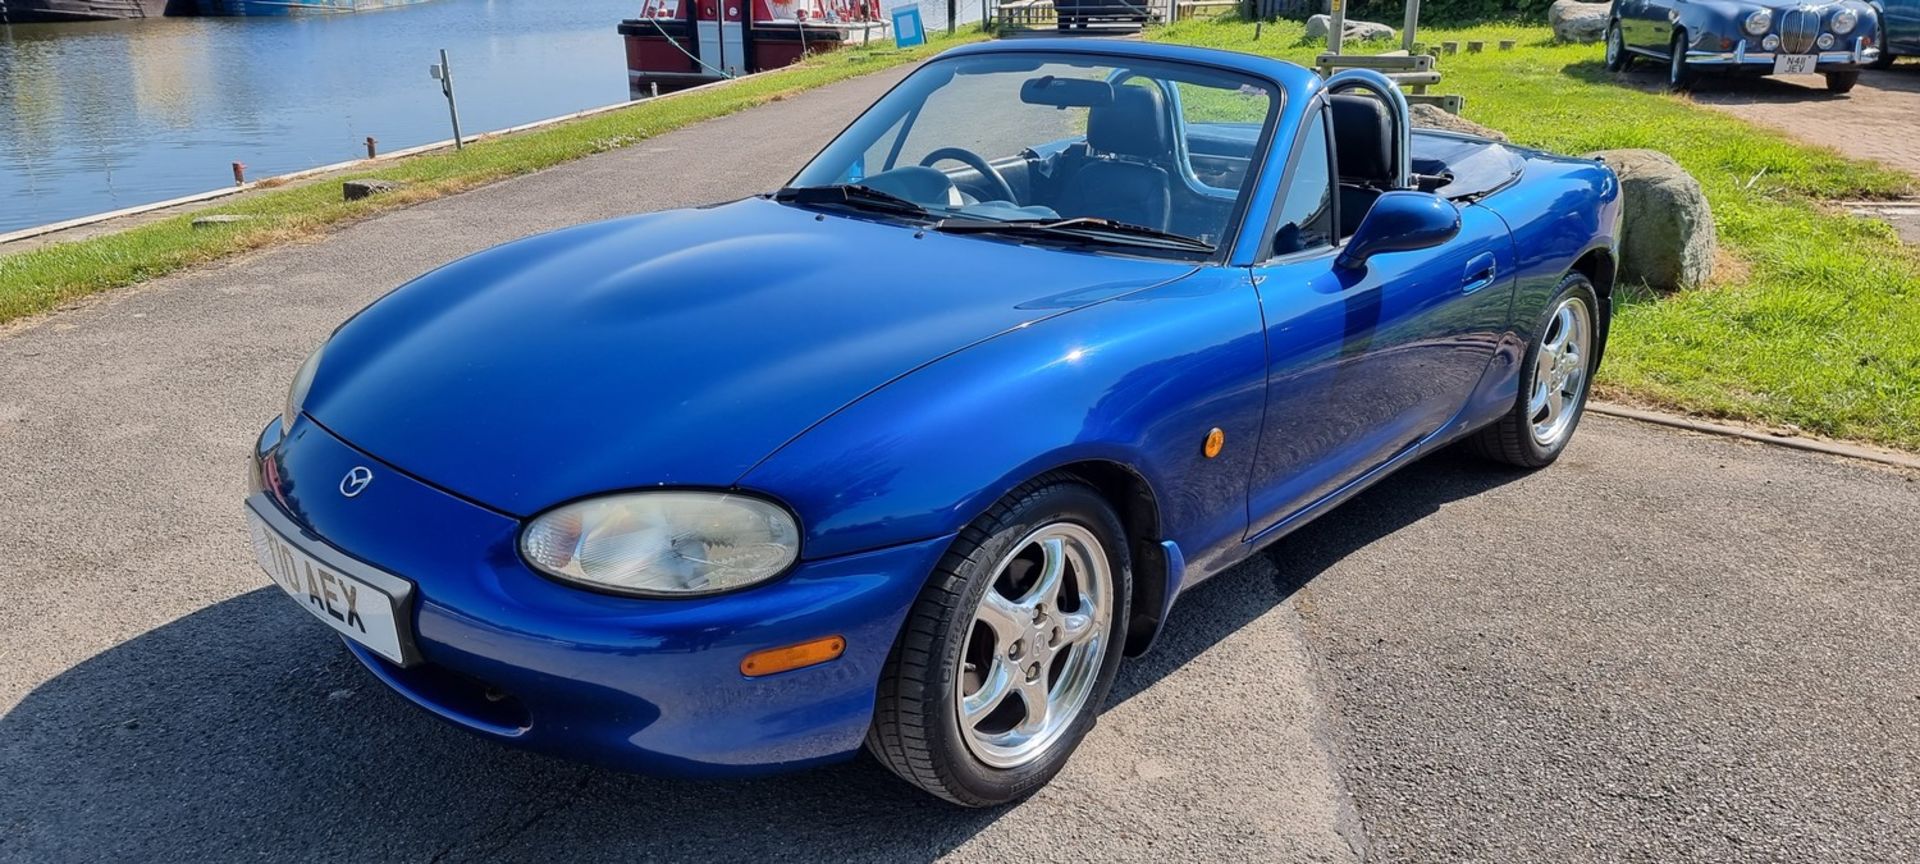 1999 Mazda MX5 10th Anniversary, 1800cc. Registration number T10AEX. Chassis number - Image 2 of 16